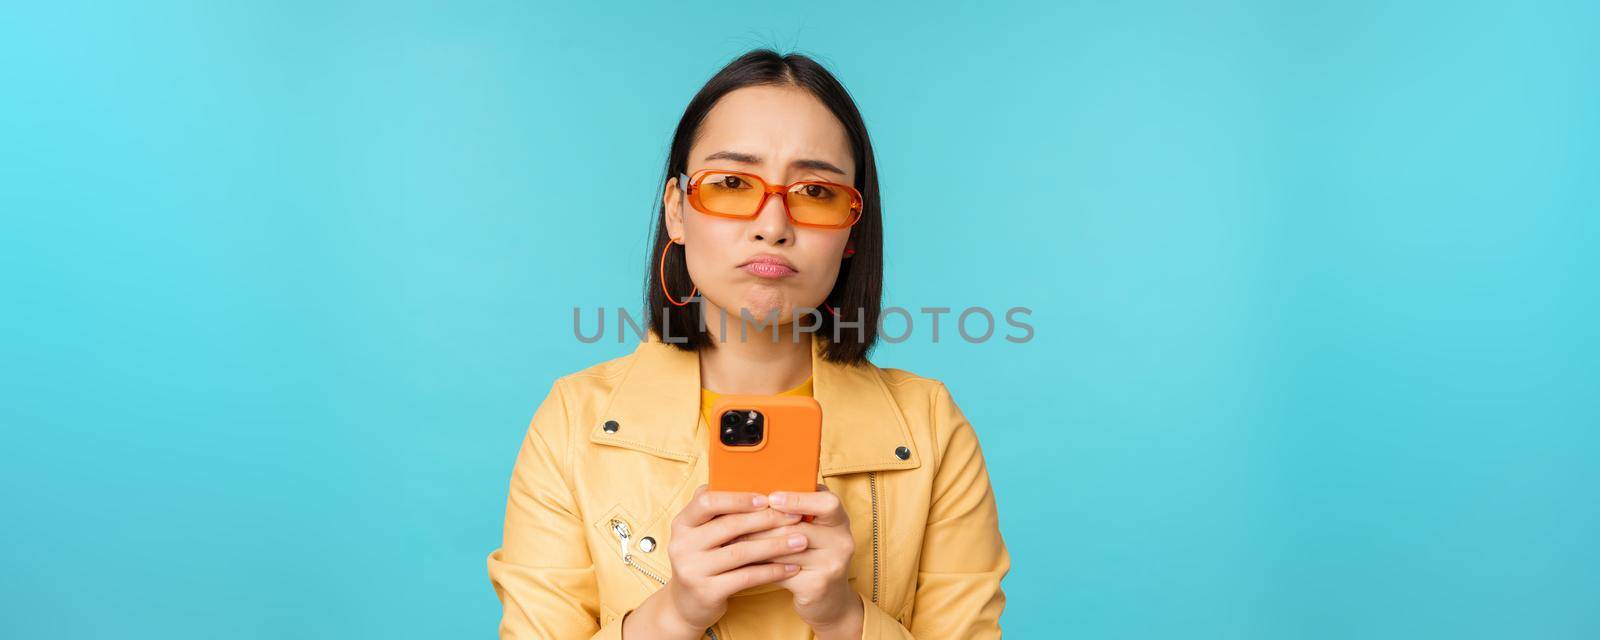 Image of sad asian girl in sunglasses, looking disappointed, holding mobile phone, standing over blue background.